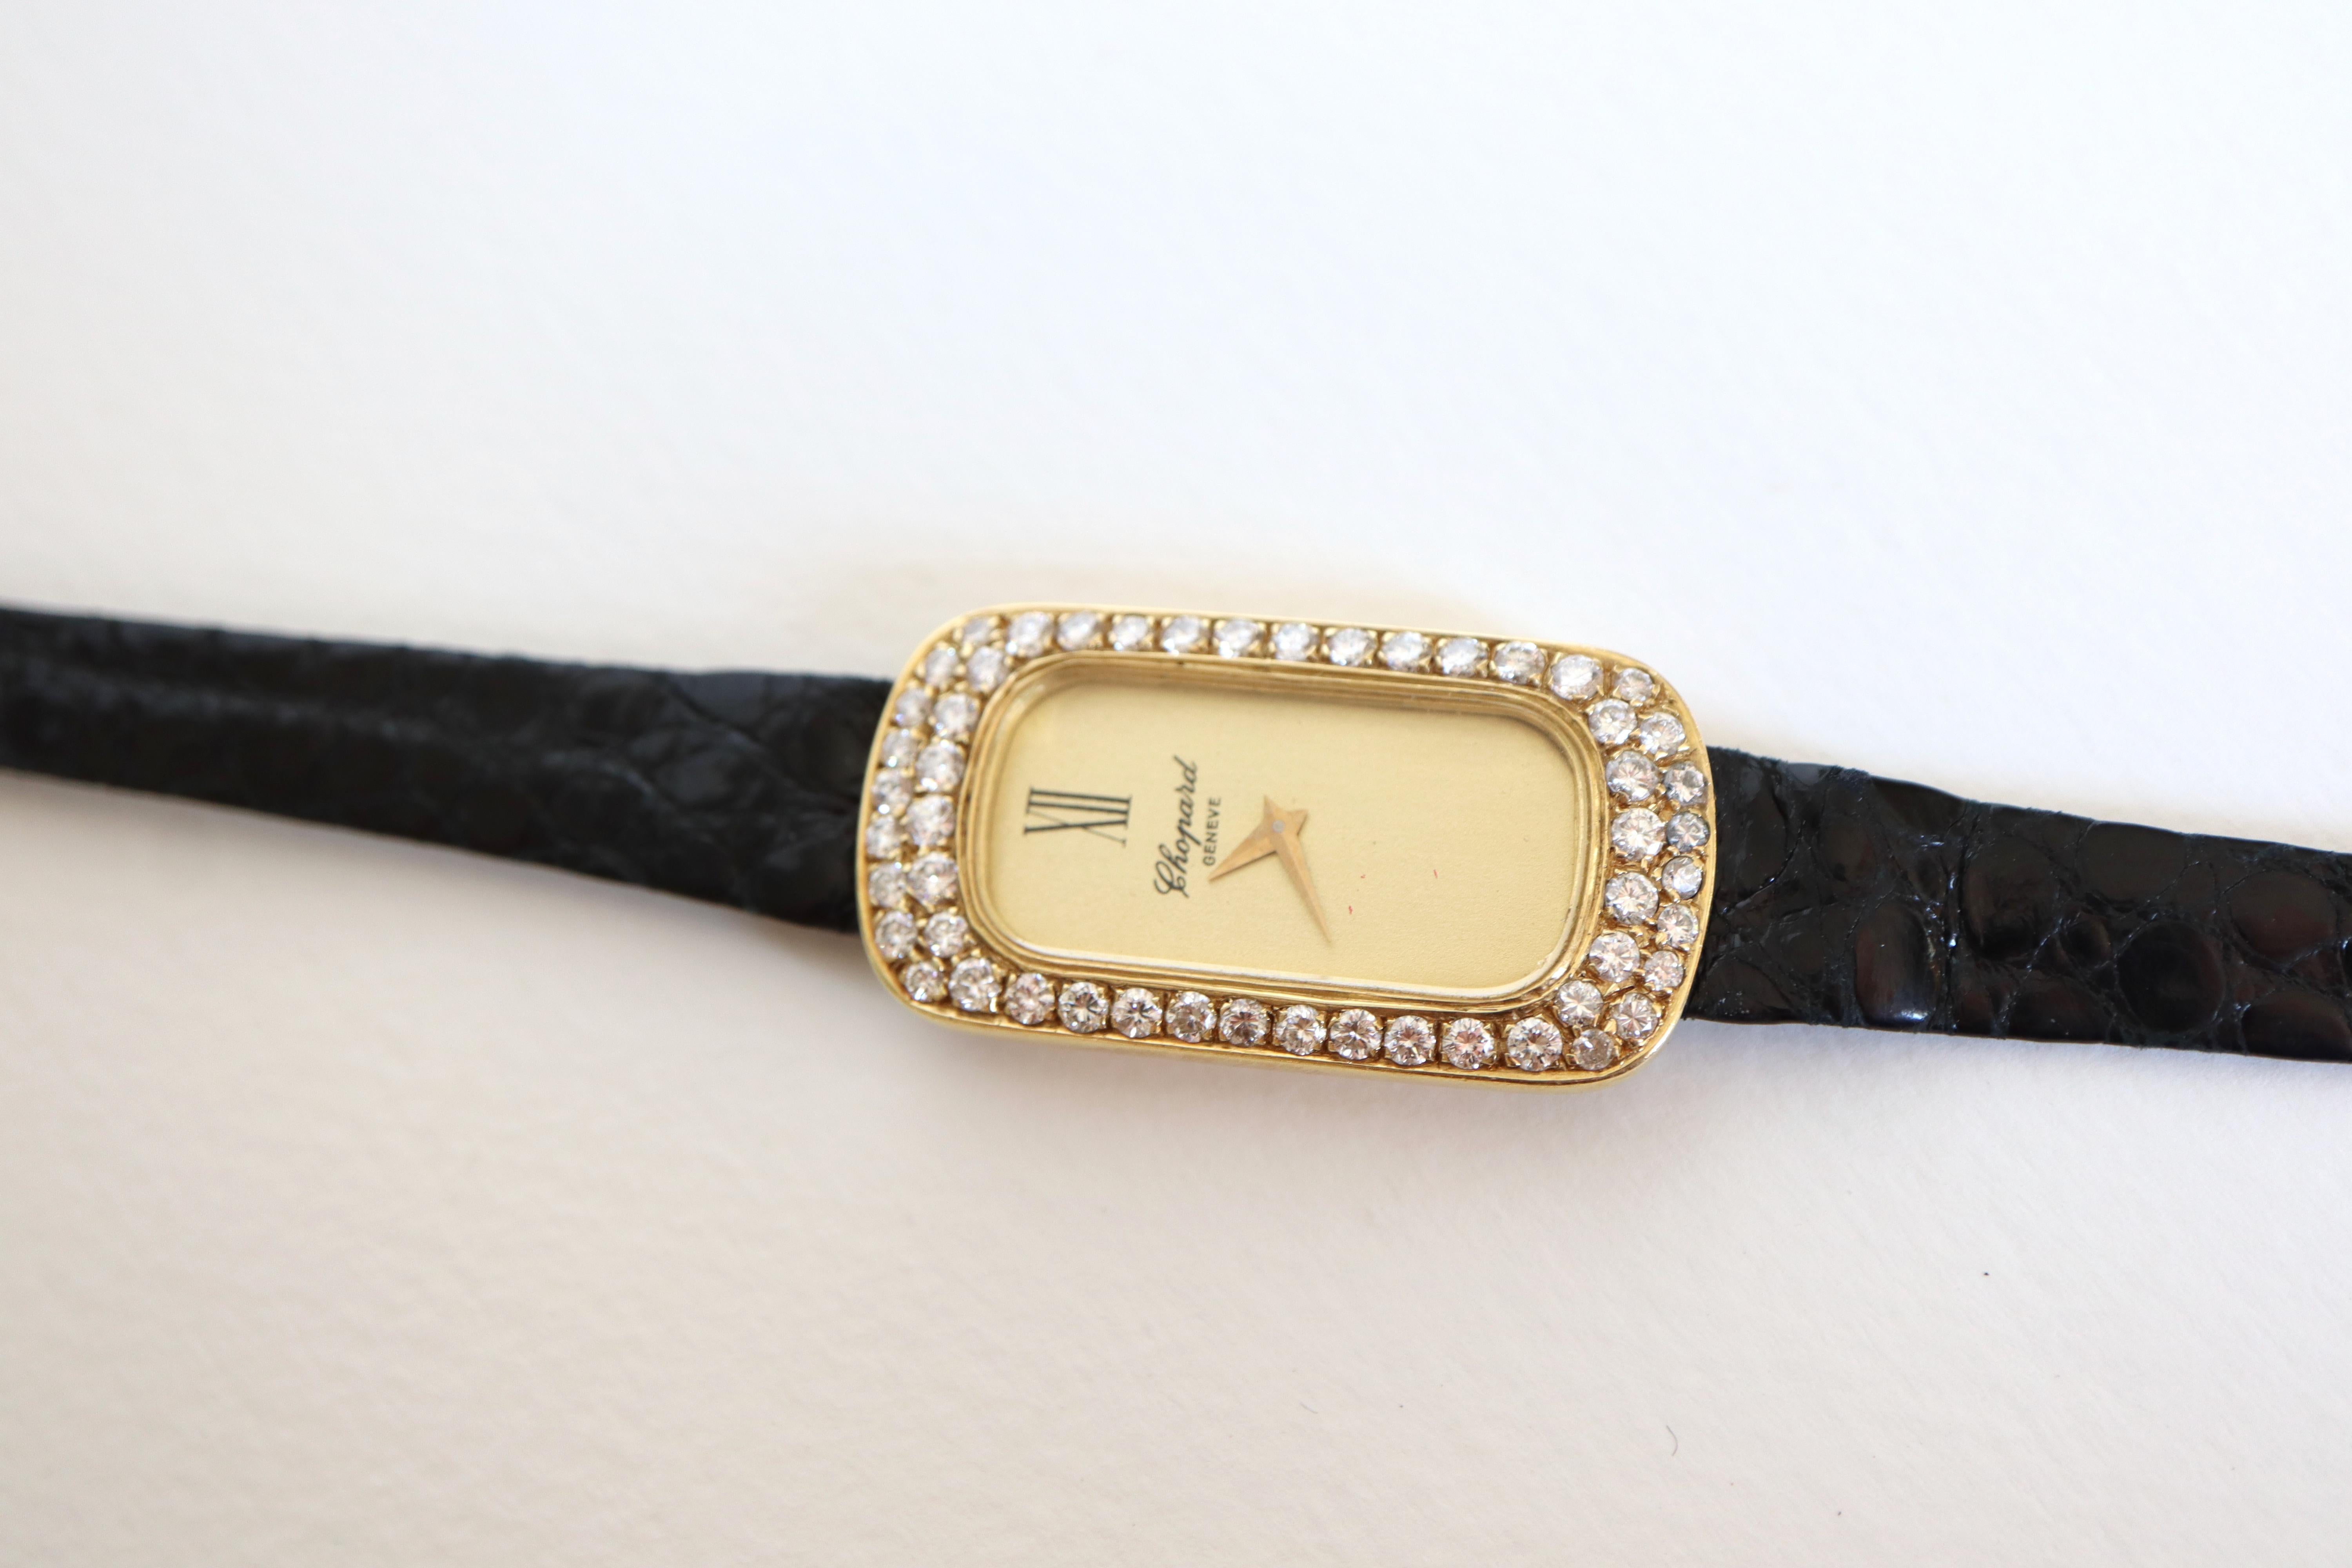 CHOPARD Lady's Watch Baignoire Model in 18-Carat Yellow Gold and Diamonds
Original leather bracelet signed Chopard Genève and original gold-plated clasp
The 18-carat yellow gold bezel is paved with 52 brilliant-cut diamonds for a total weight of